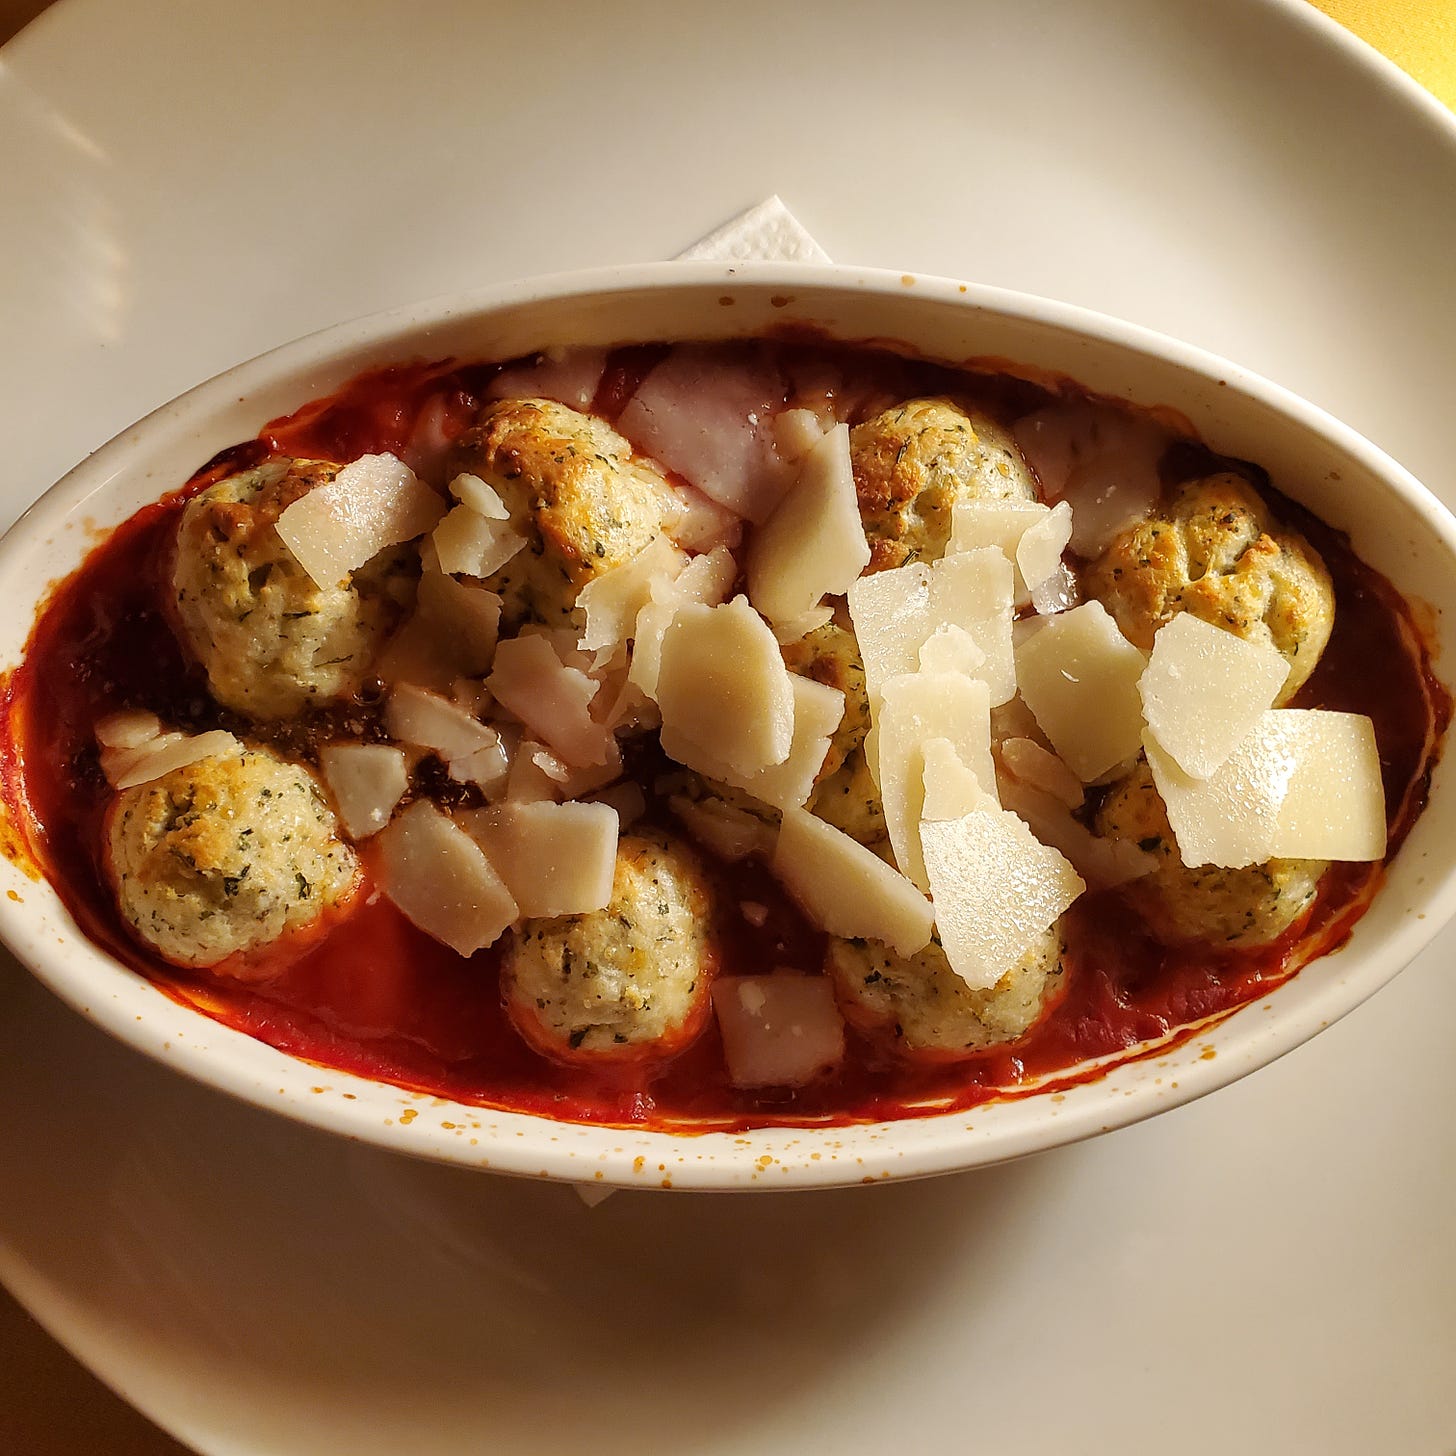 Little round dumplings in tomato sauce with shaved cheese.